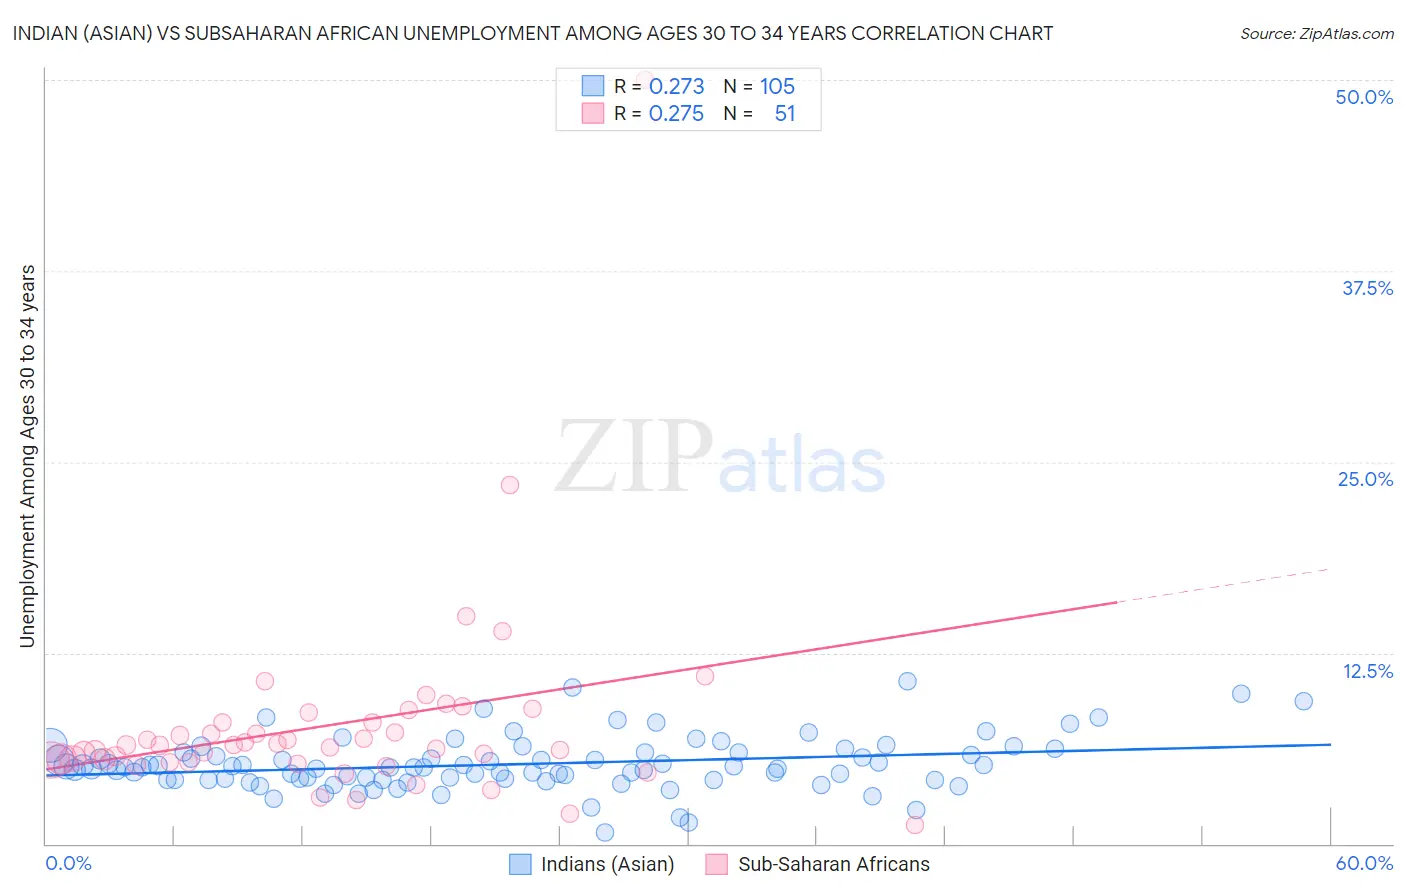 Indian (Asian) vs Subsaharan African Unemployment Among Ages 30 to 34 years